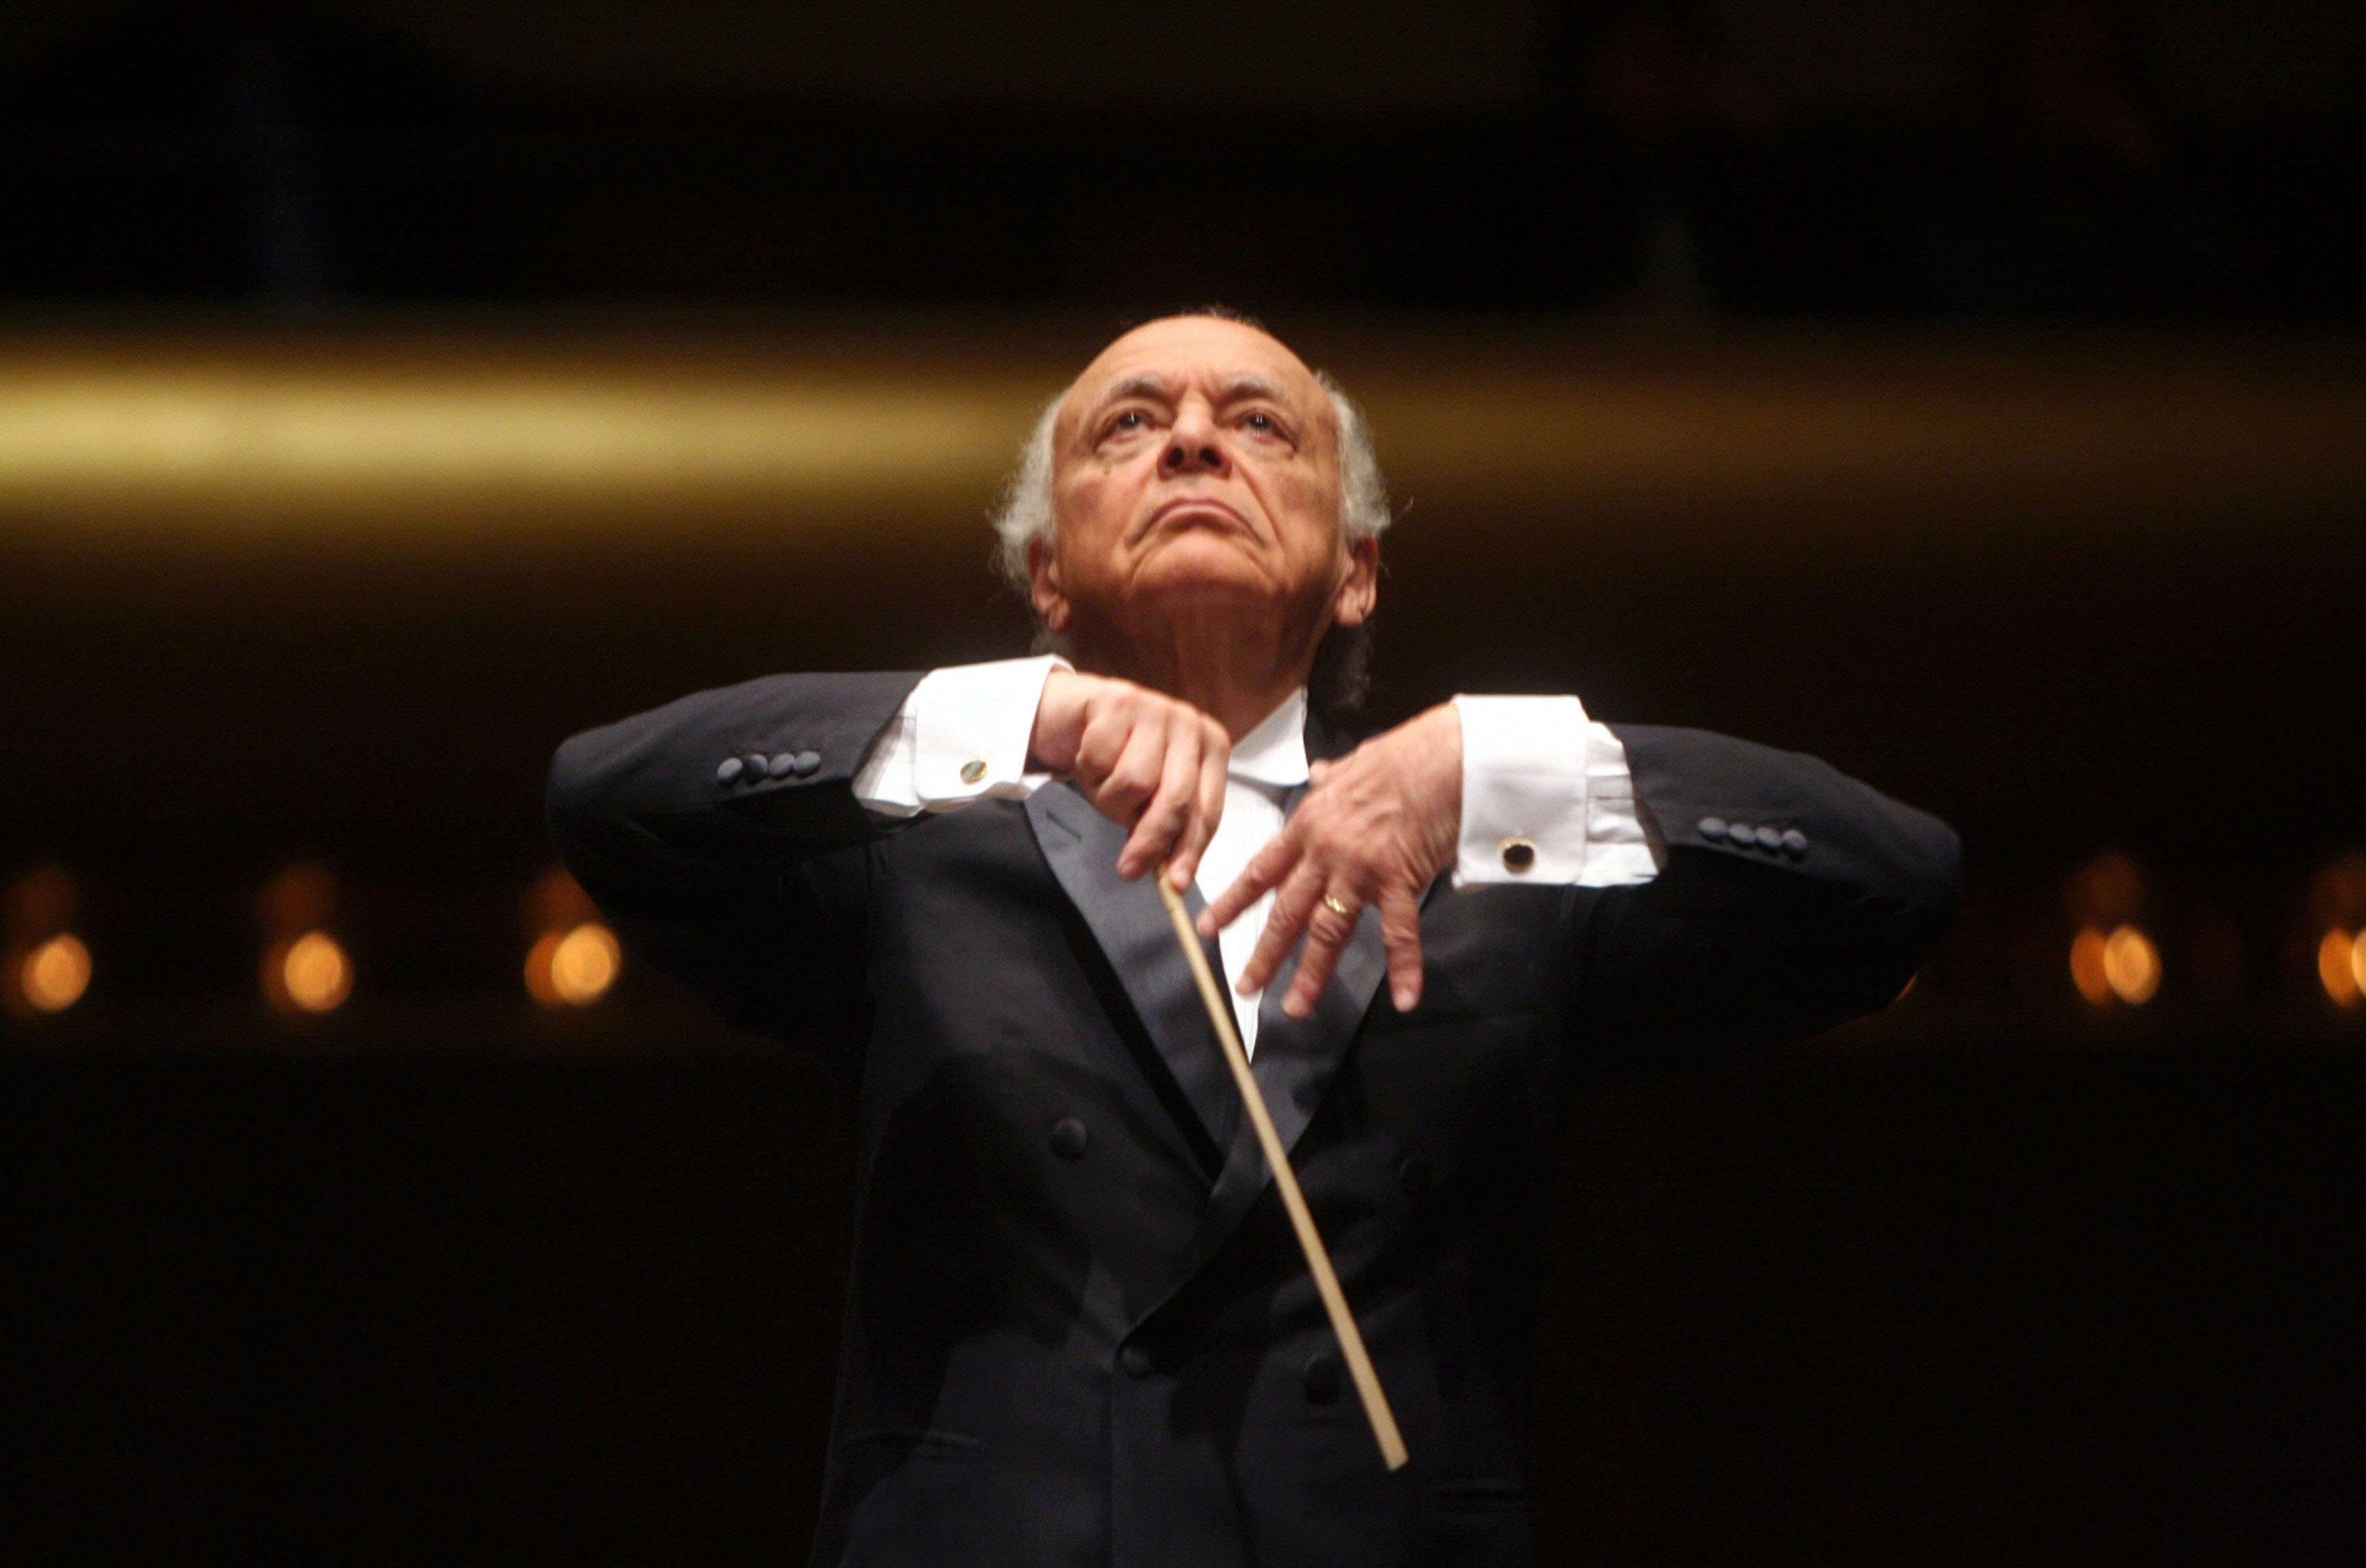 Lorin Maazel conducts New York Philharmonic in Brahms's 